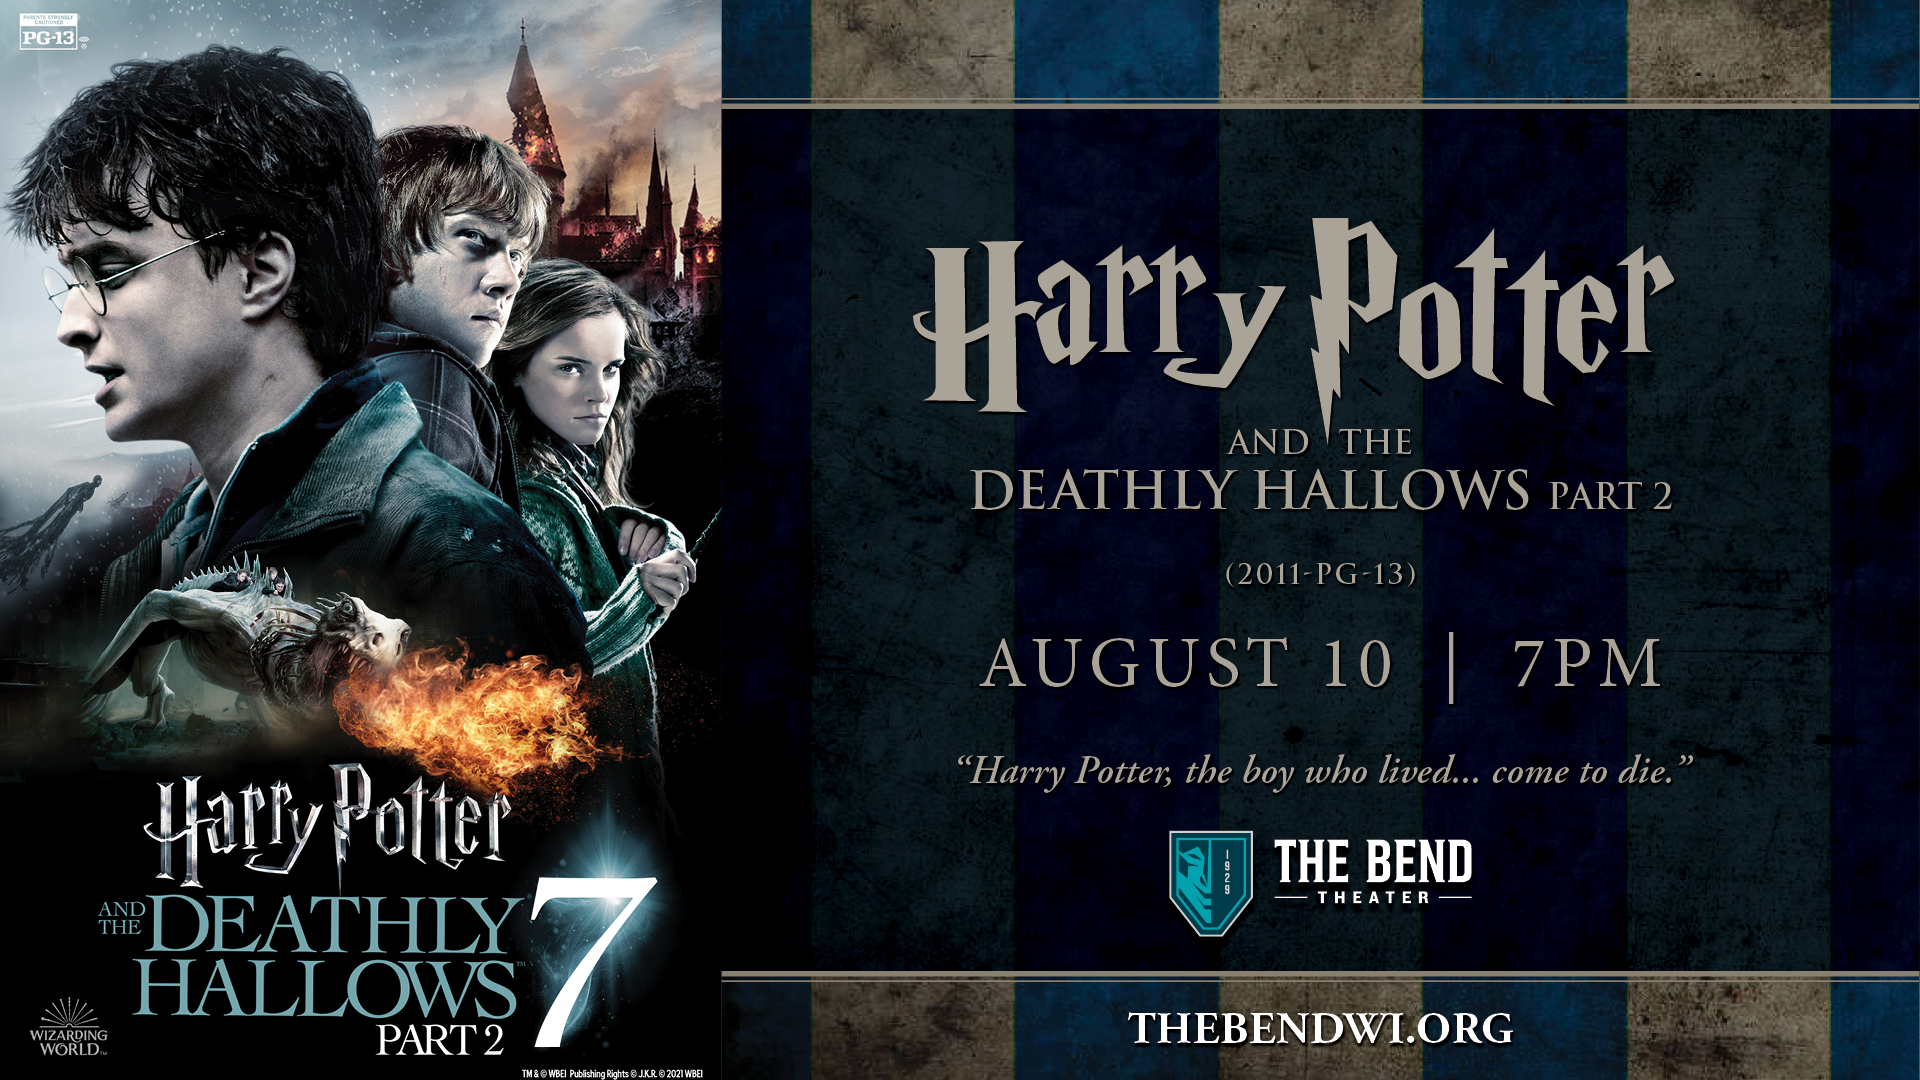 Wizarding World Nights at The Bend Theater: Harry Potter and The Deathly Hallows - Part 2 (2011 - PG-13)